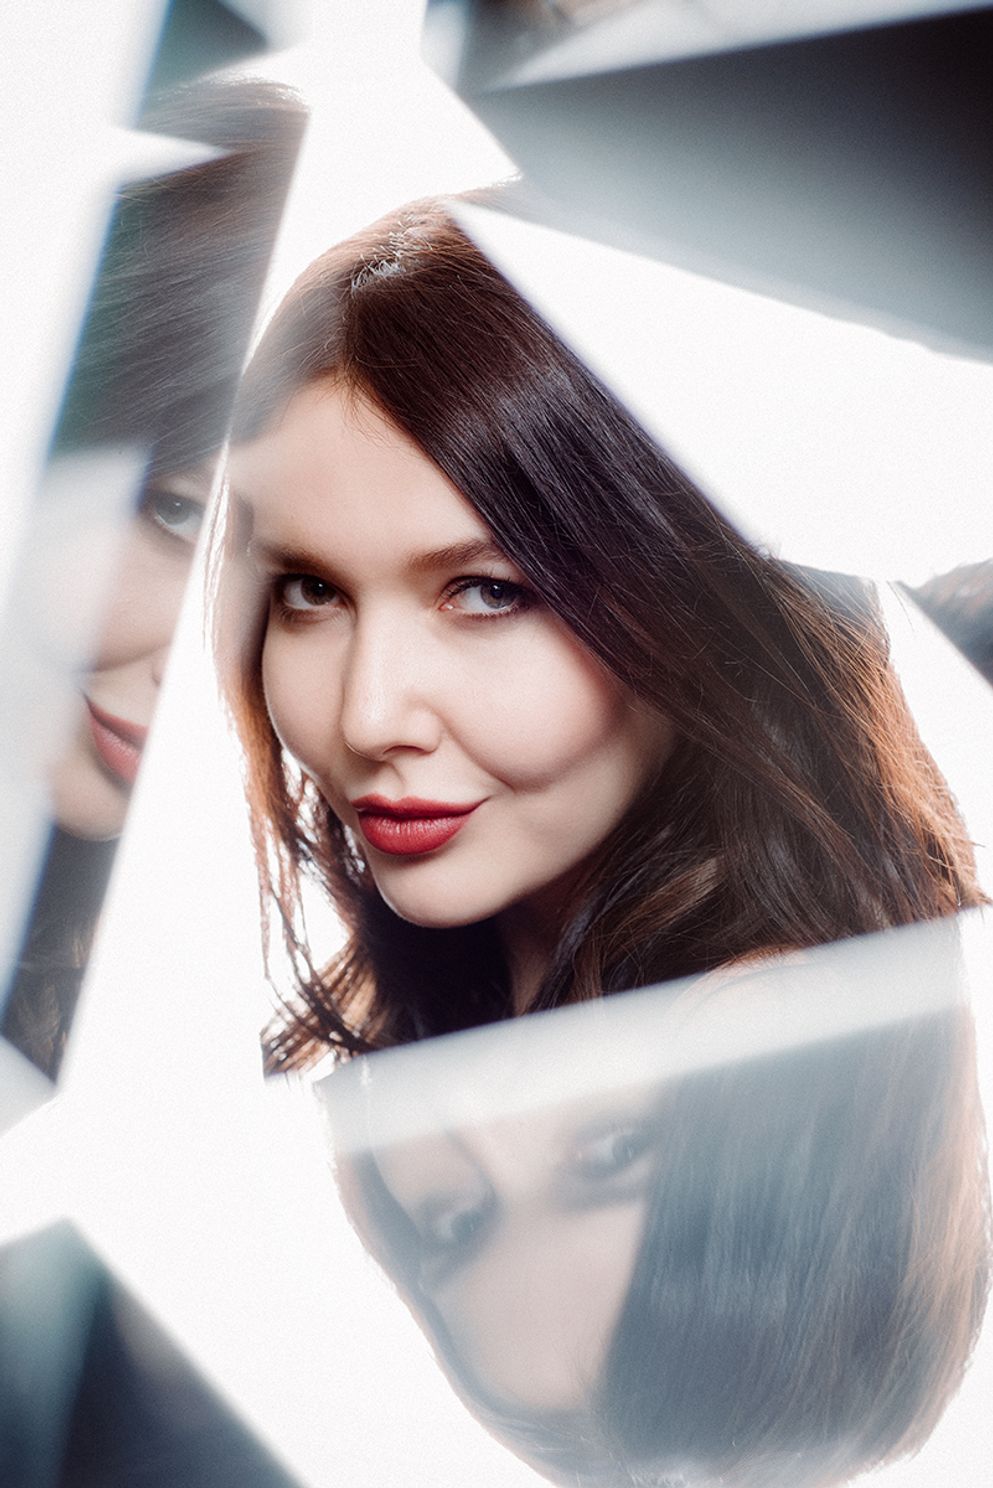 portrait of a female model shot through a prism reflecting multiple images of her face